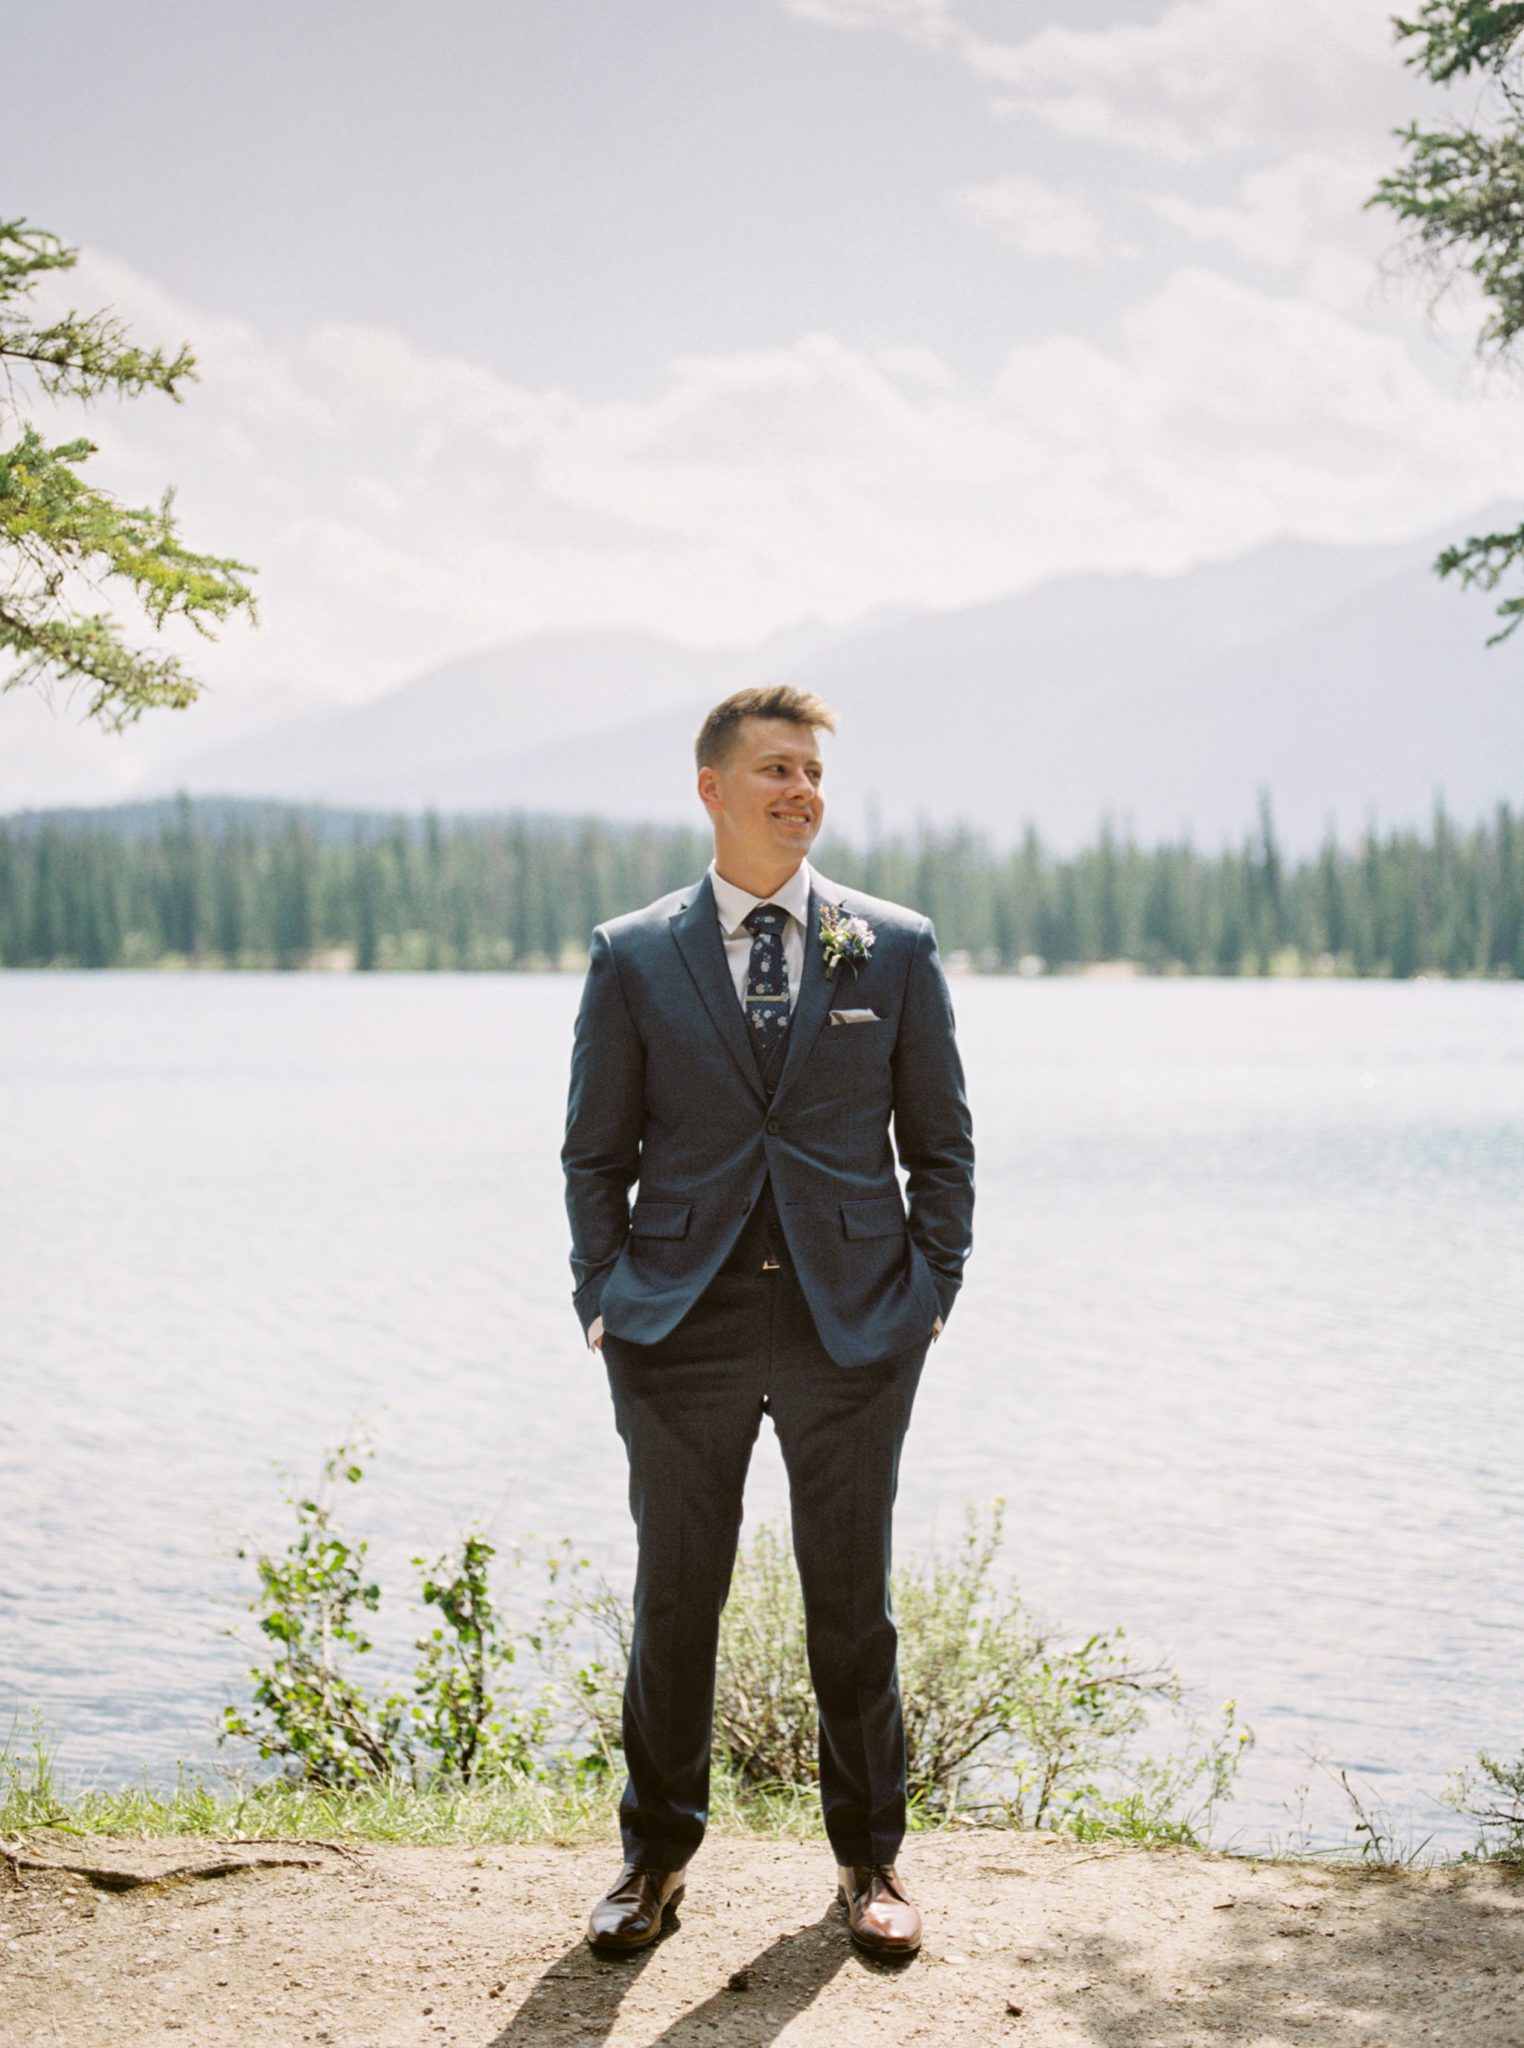 Groom attire inspiration in a navy suit